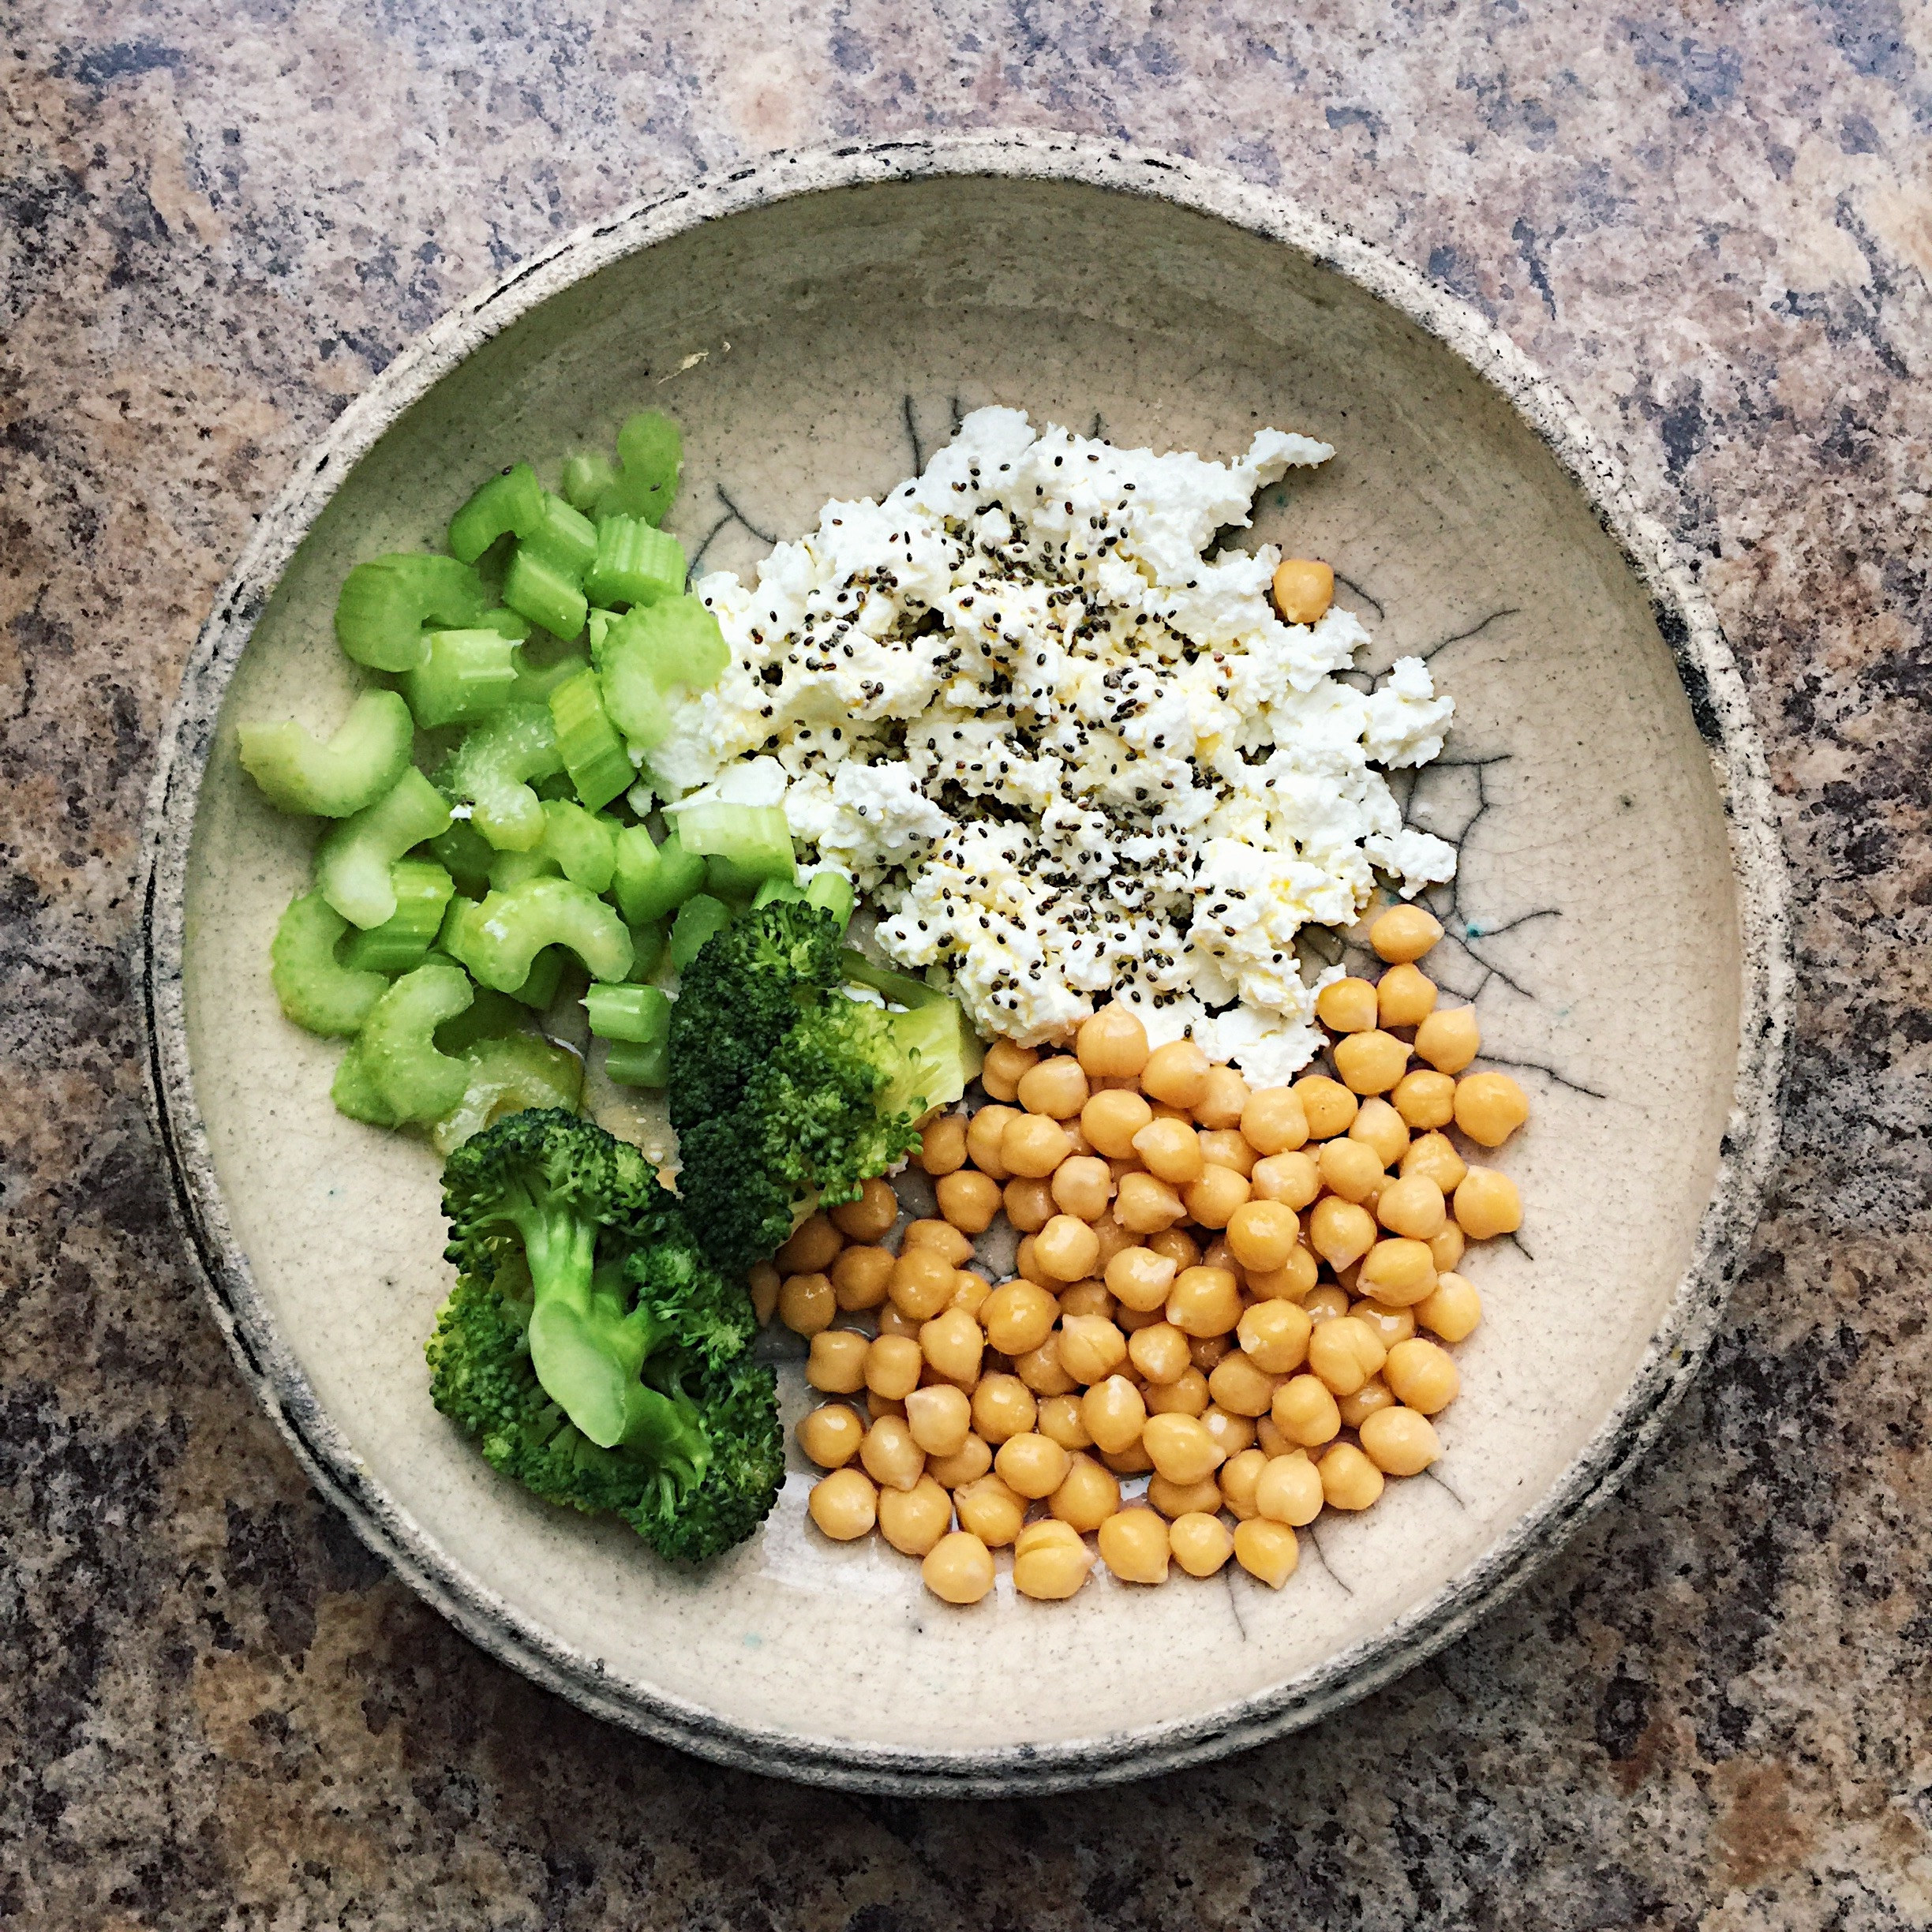 Cottage cheese with broccoli, celery, and chickpeas